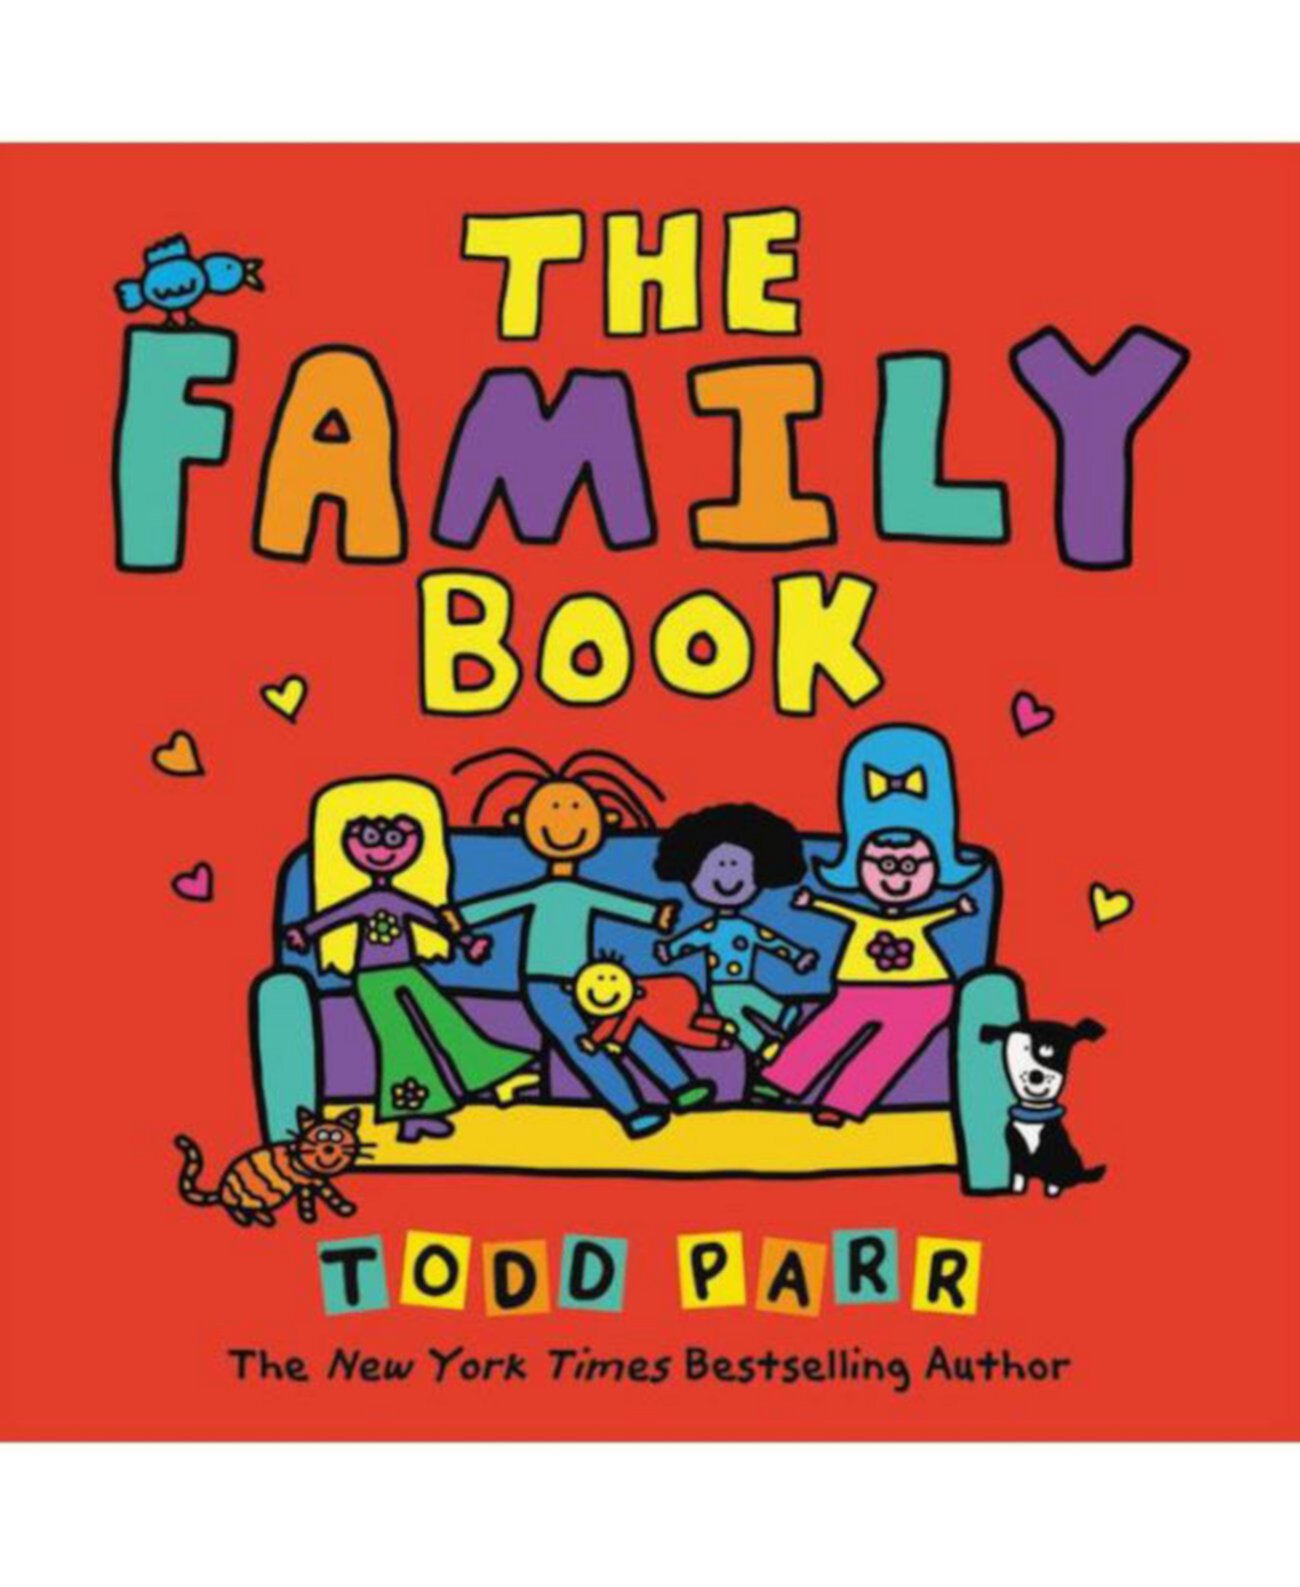 Books my family. The Family book. Books about Family. The Family книга. Book Cover Family.